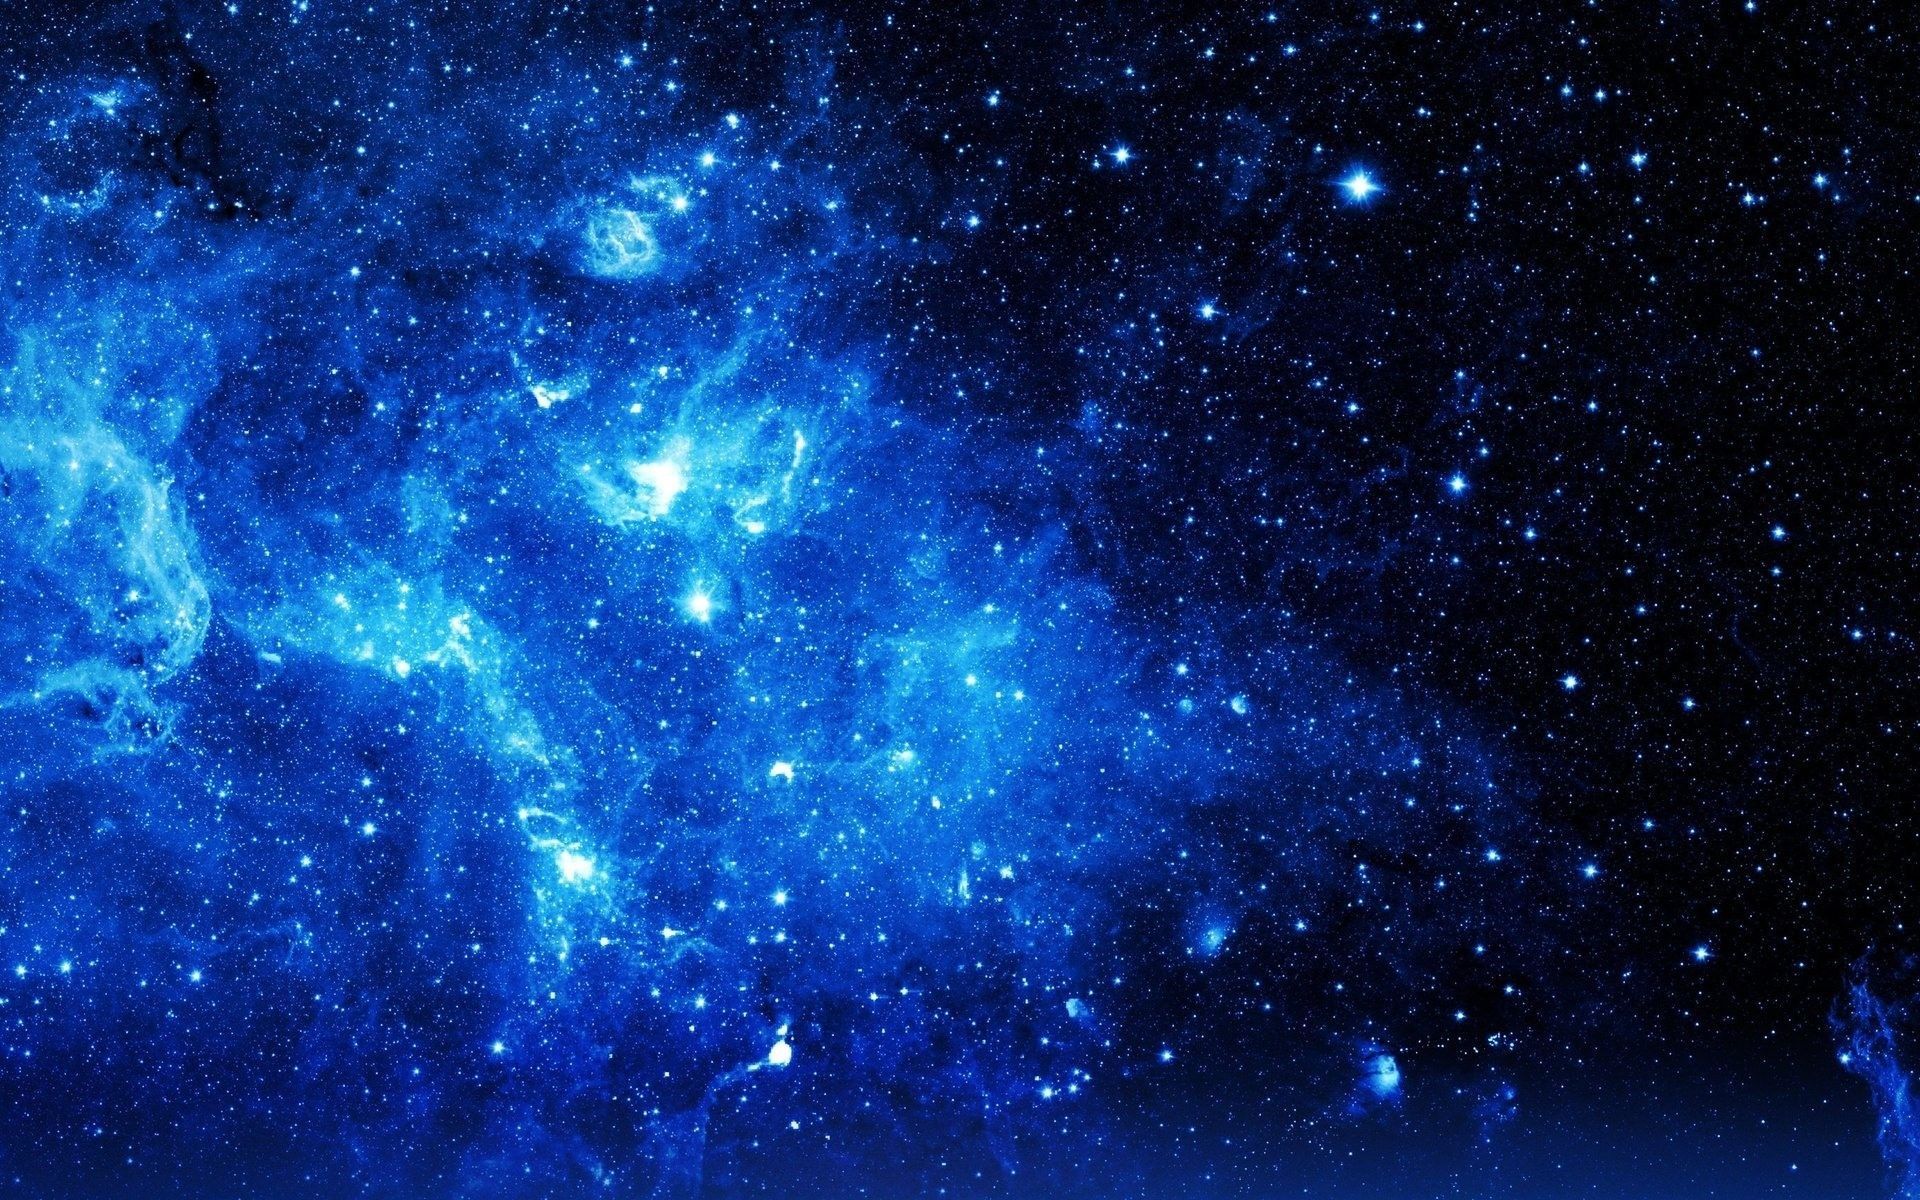 Space Galaxy Blue on Dog iPhone Wallpapers Free Download